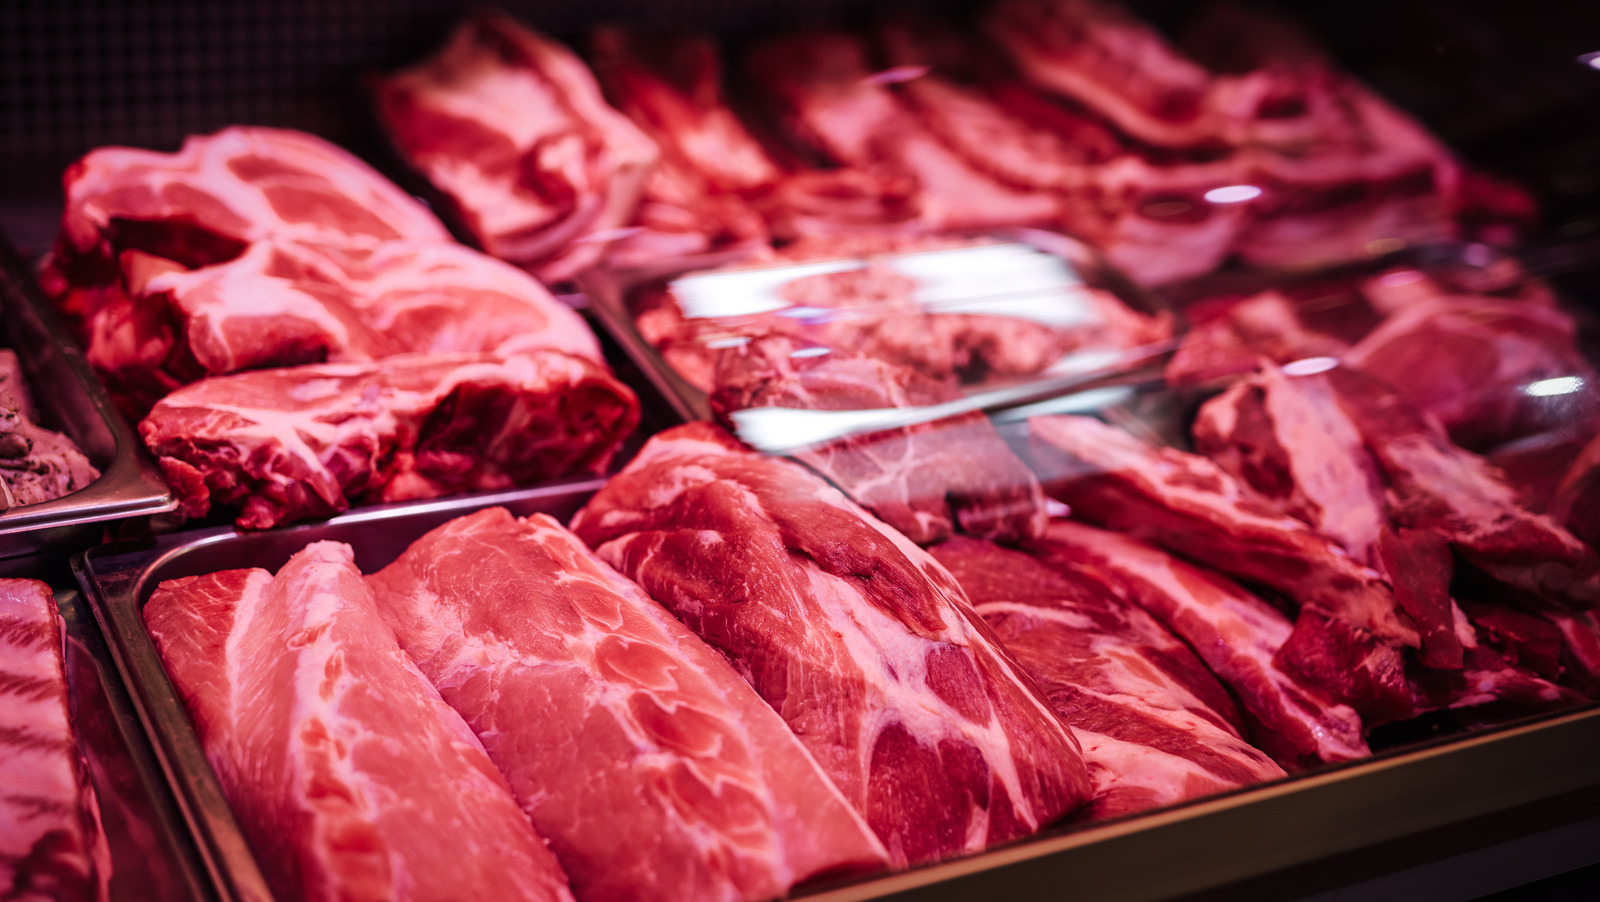 What Methods Do Grocery Stores Use to Keep Meat Fresh? - Fresh Farms